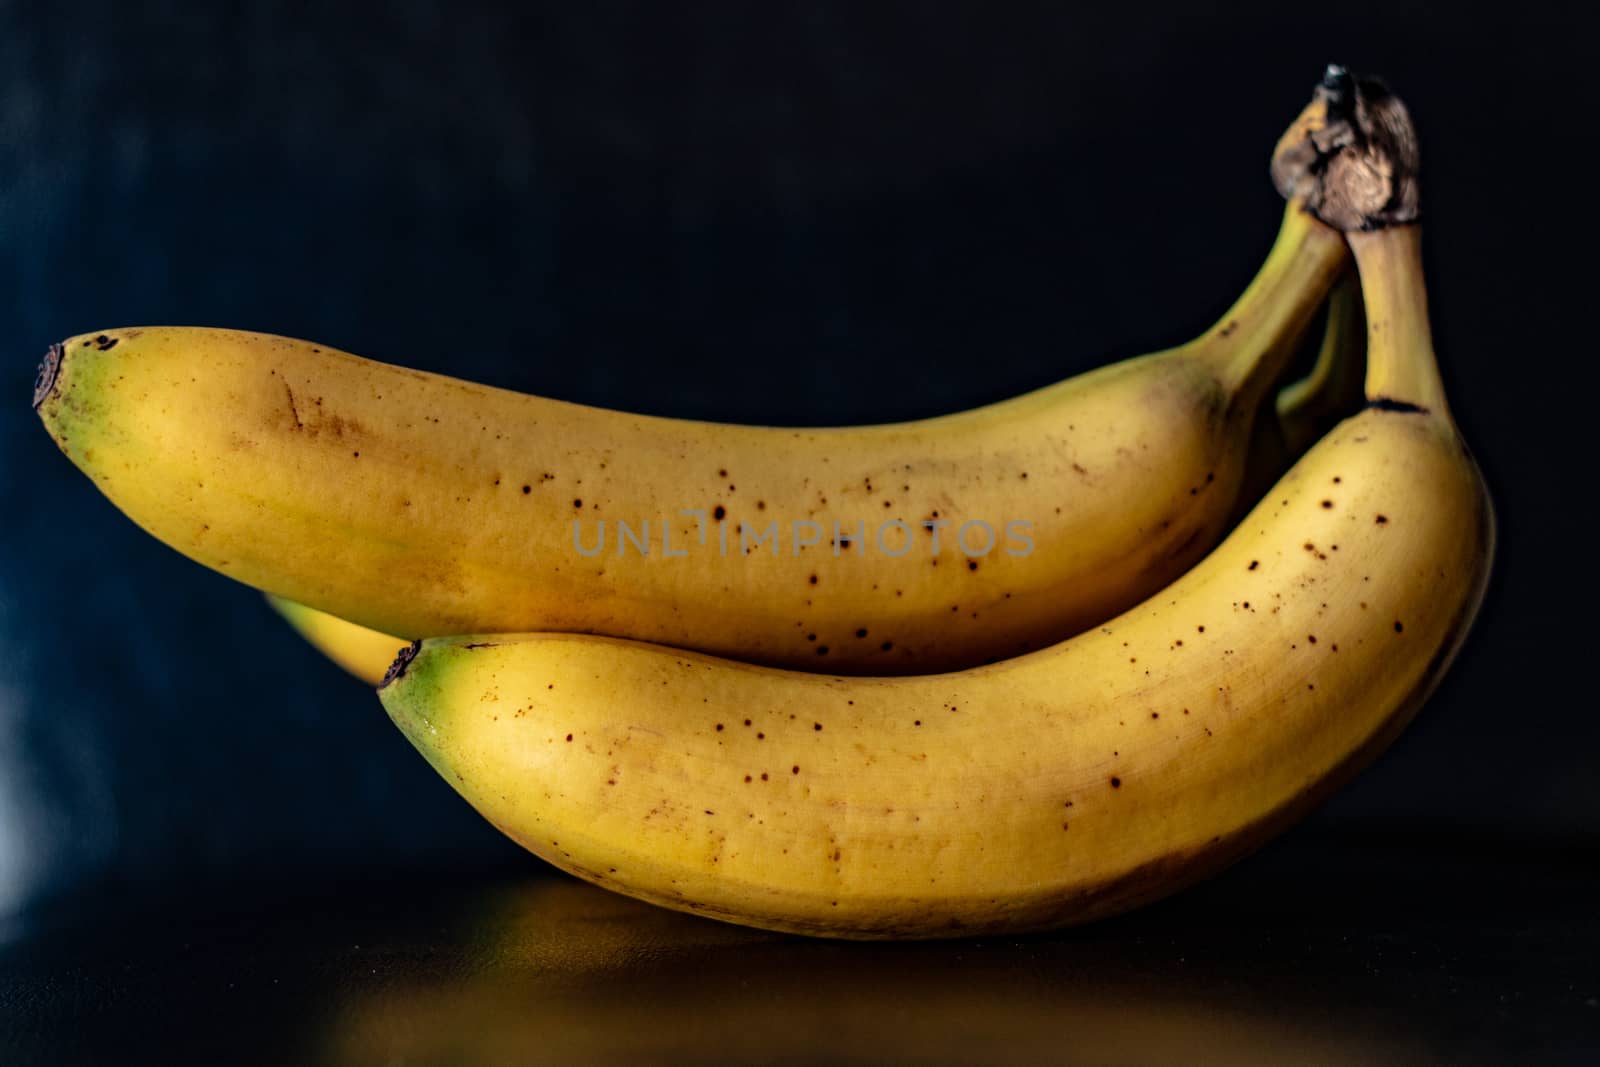 Group of bananas on a black background